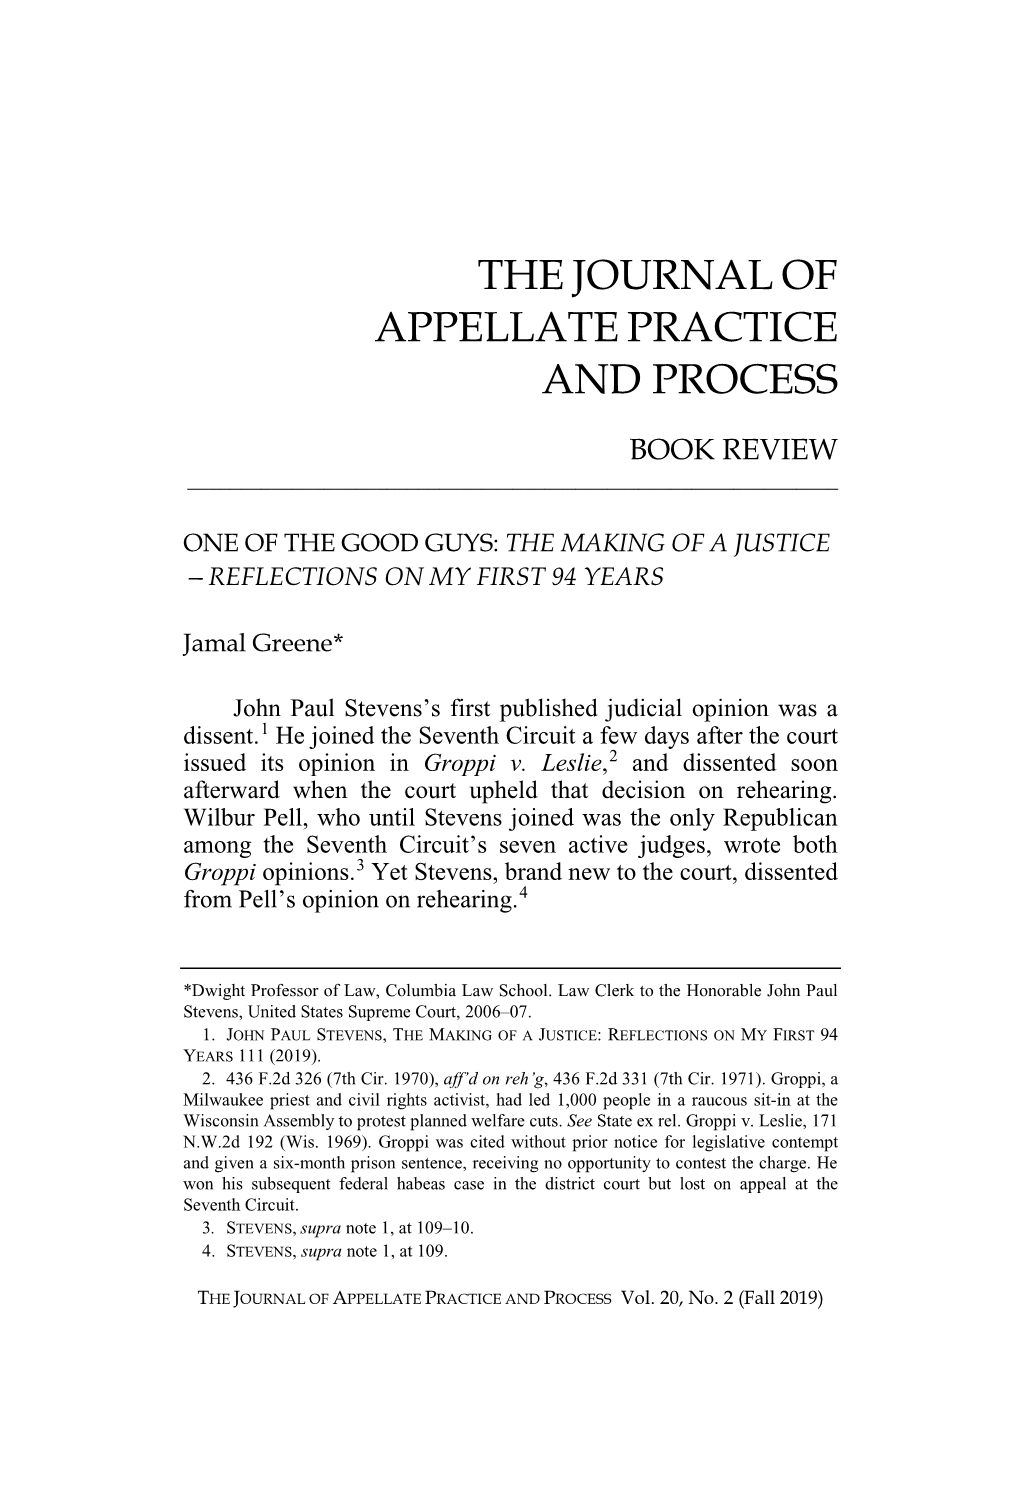 The Journal of Appellate Practice and Process